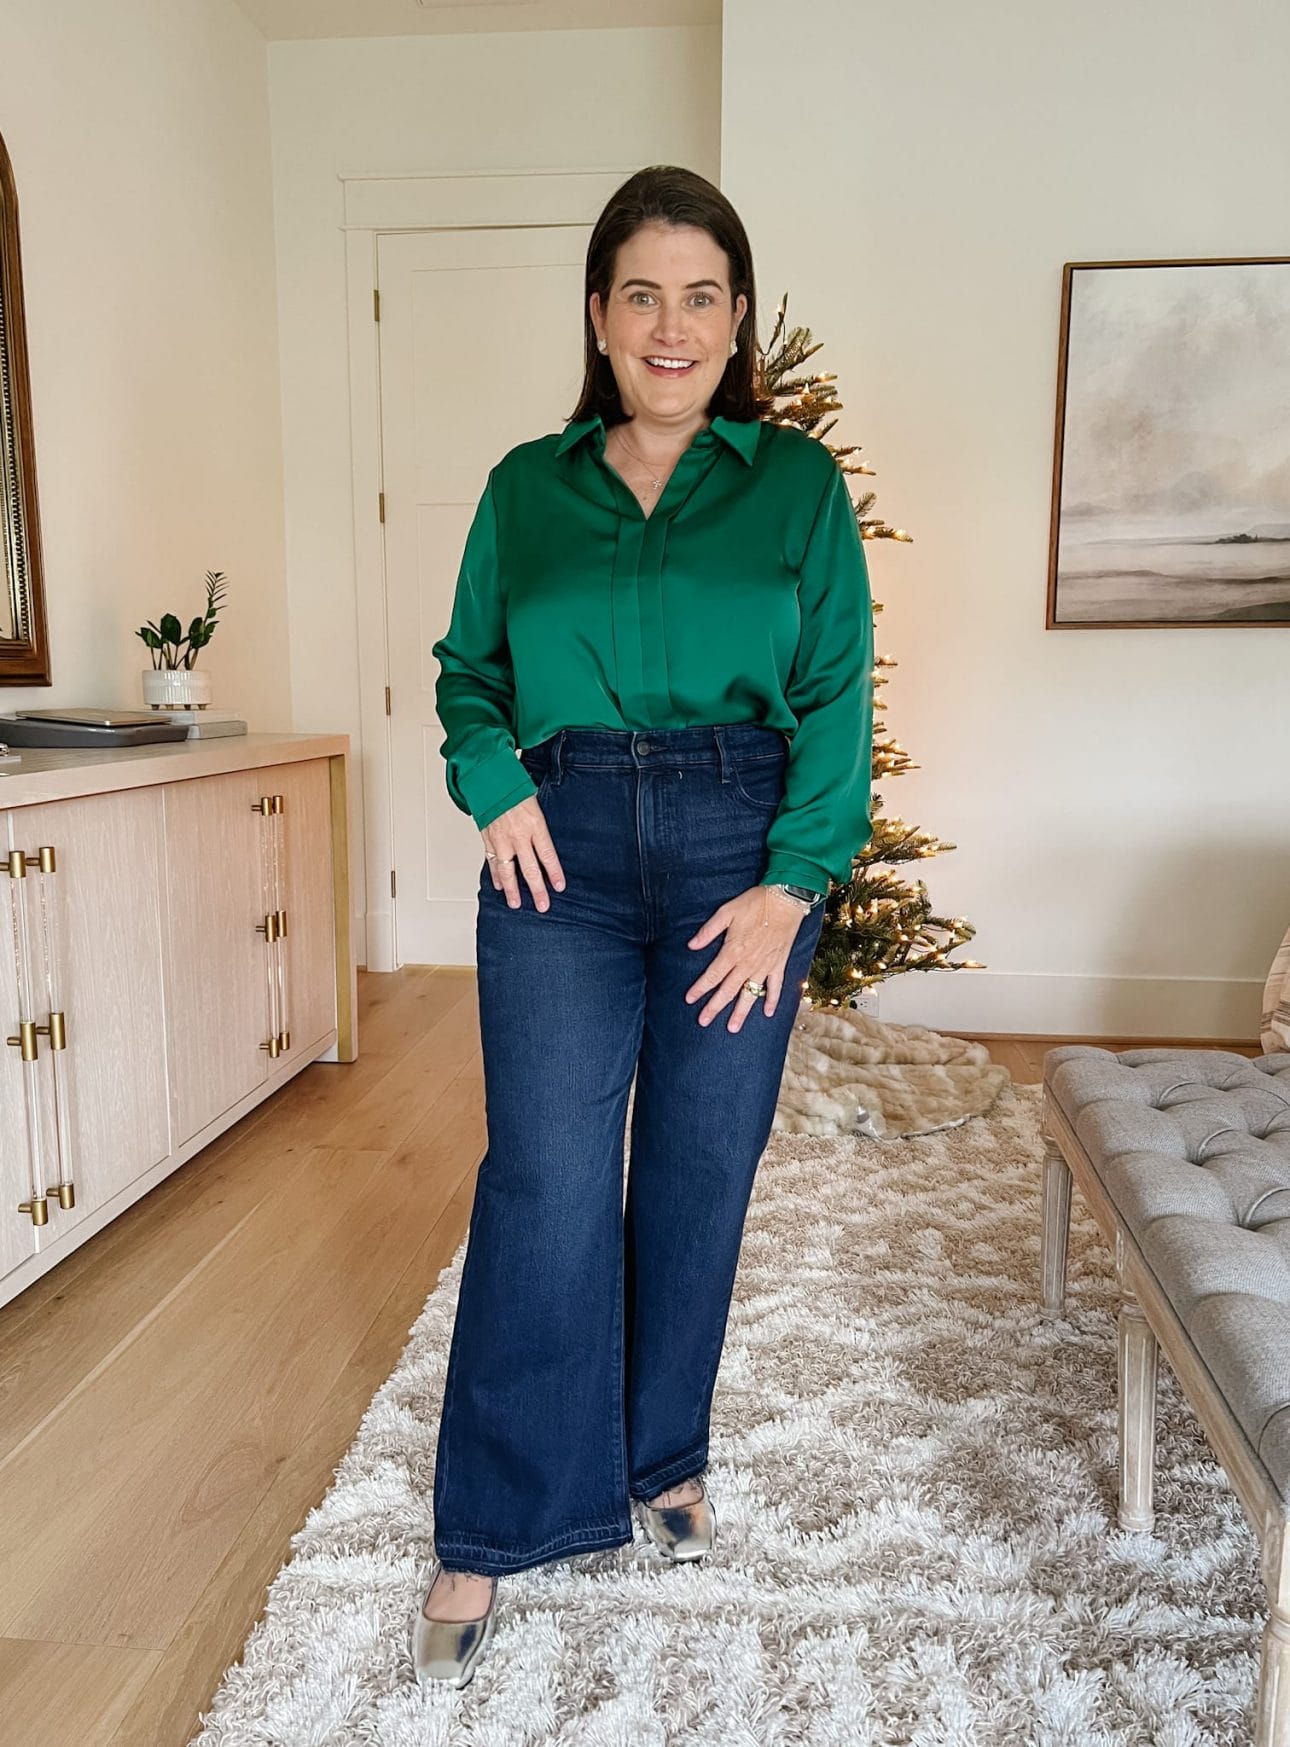 Green Blouse, Jeans, Flats
